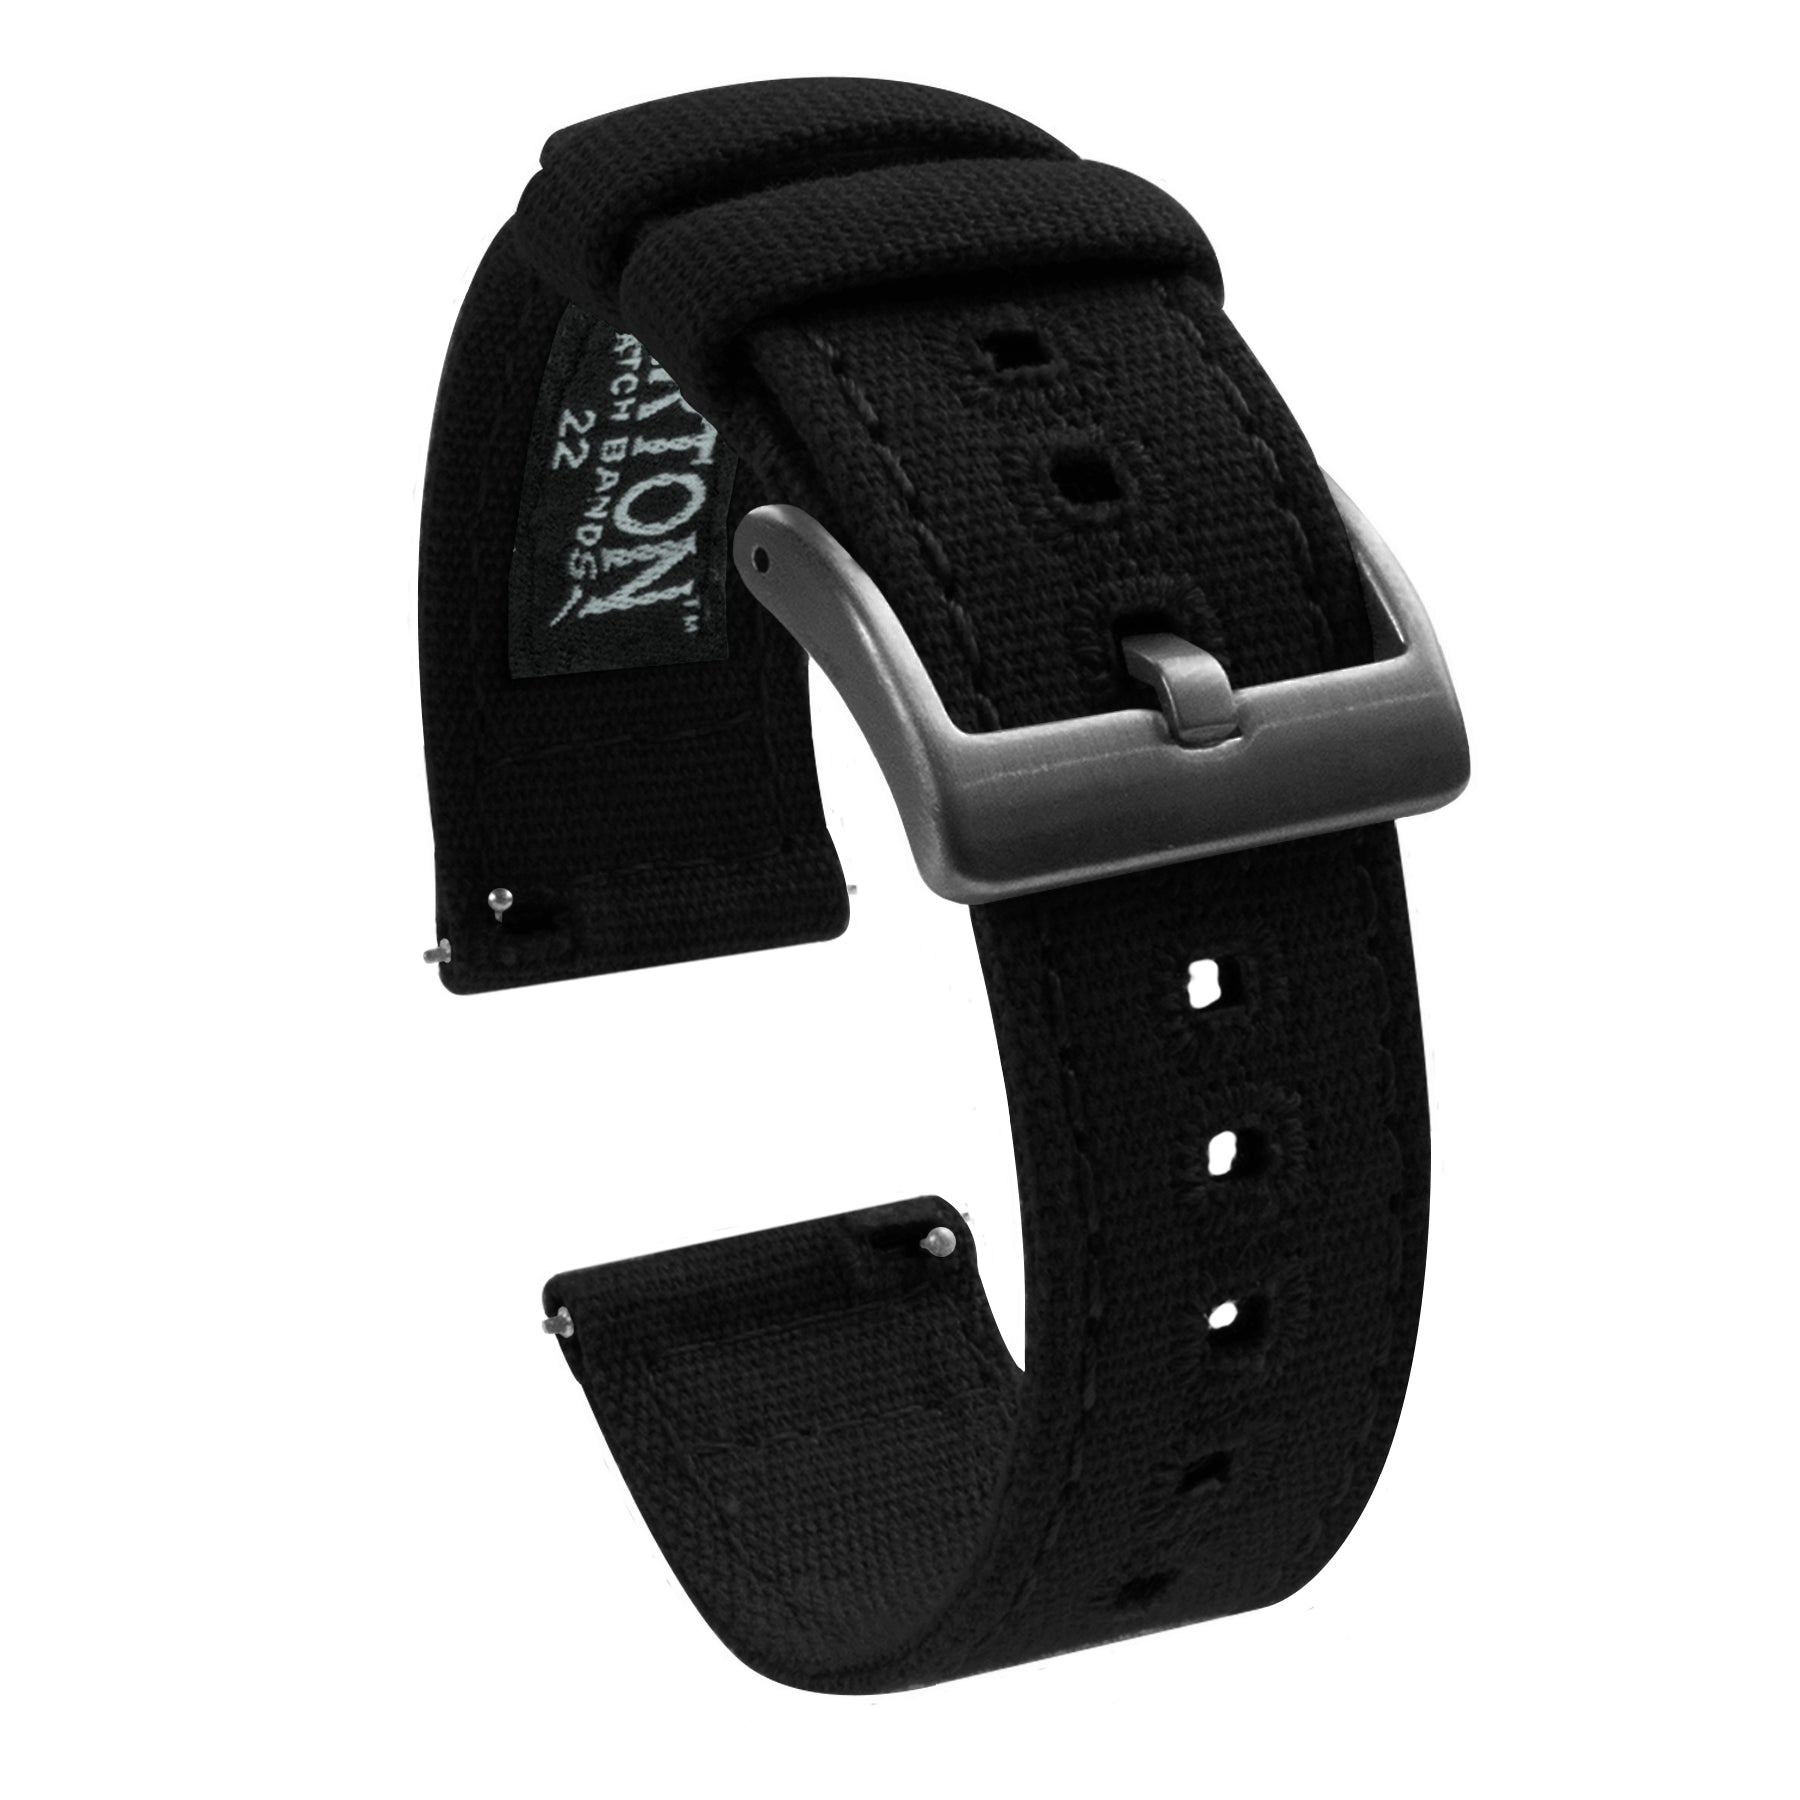 Barton Quick Release Canvas Watch Band Straps